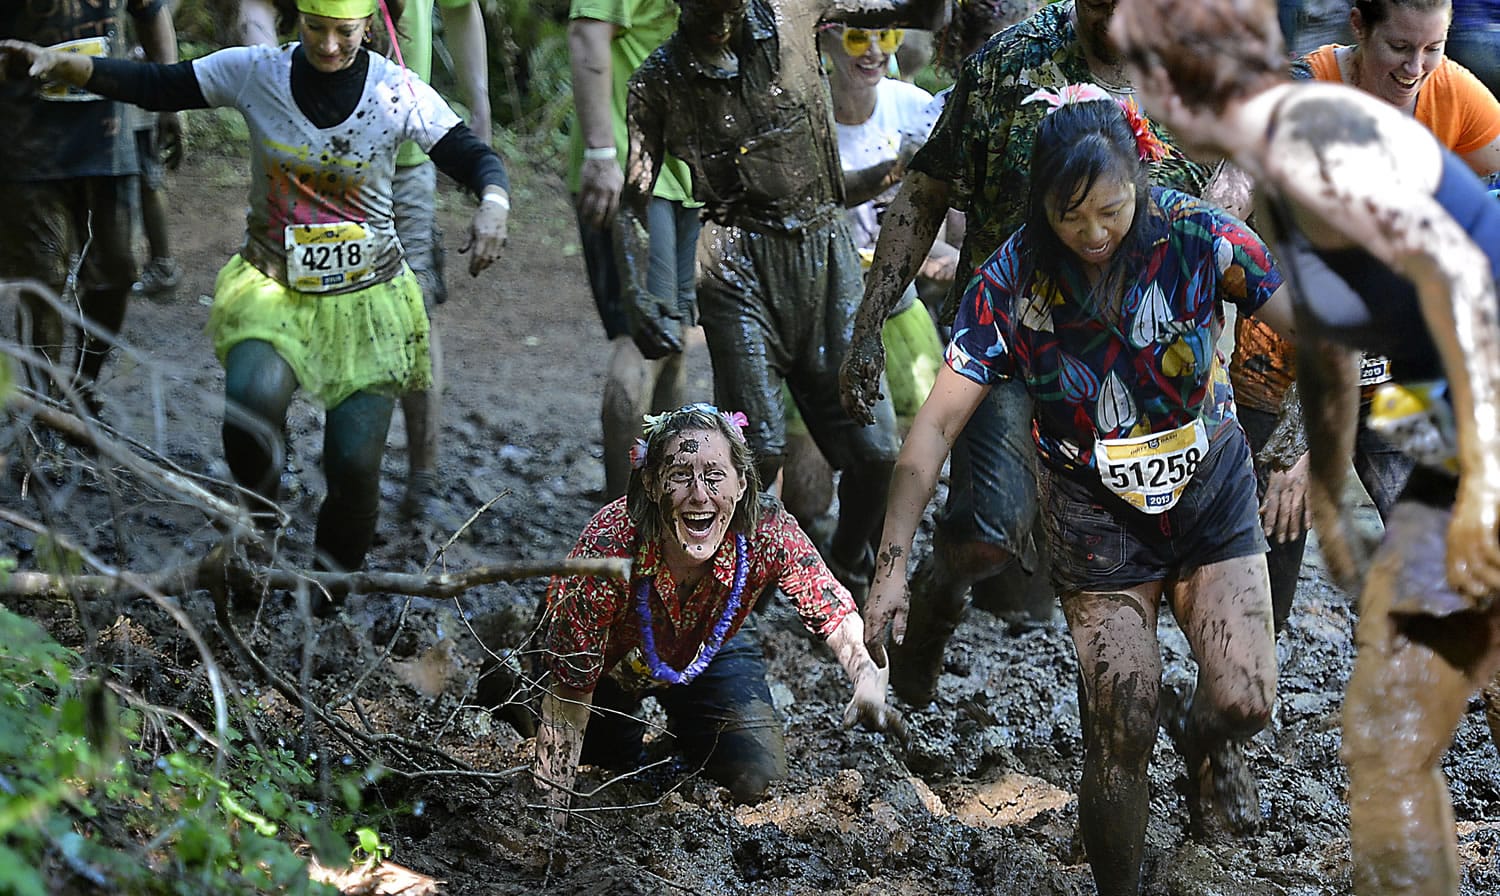 Participants get dirty during &quot;The Dirty Dash,&quot; a race where people wallow through a 5K mud course.